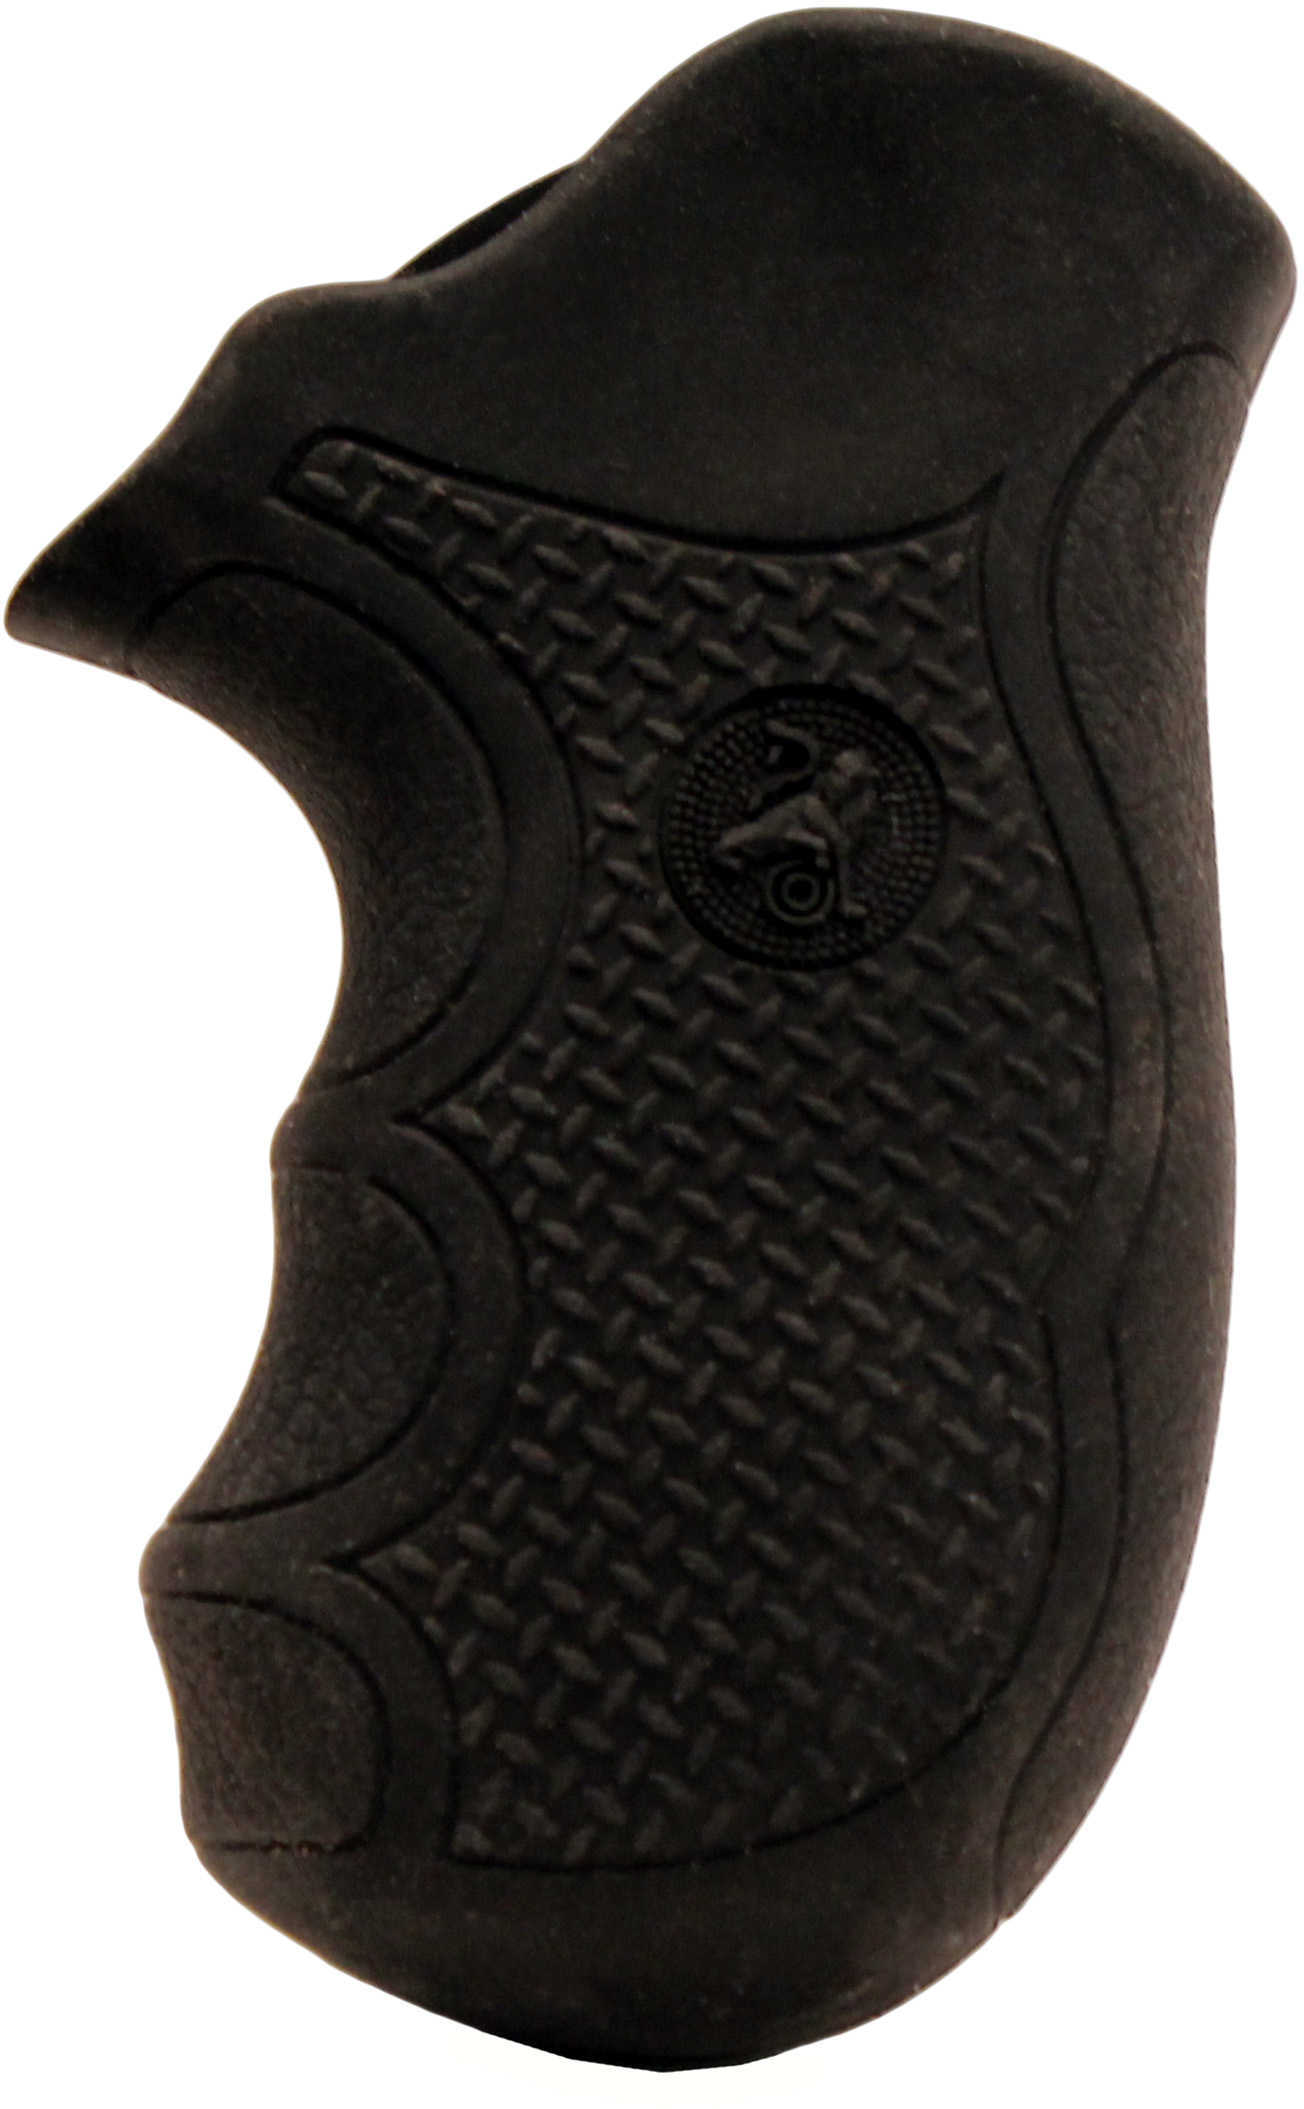 Pachmayr Diamond Pro Ruger® Grips SP101 Md: 02483